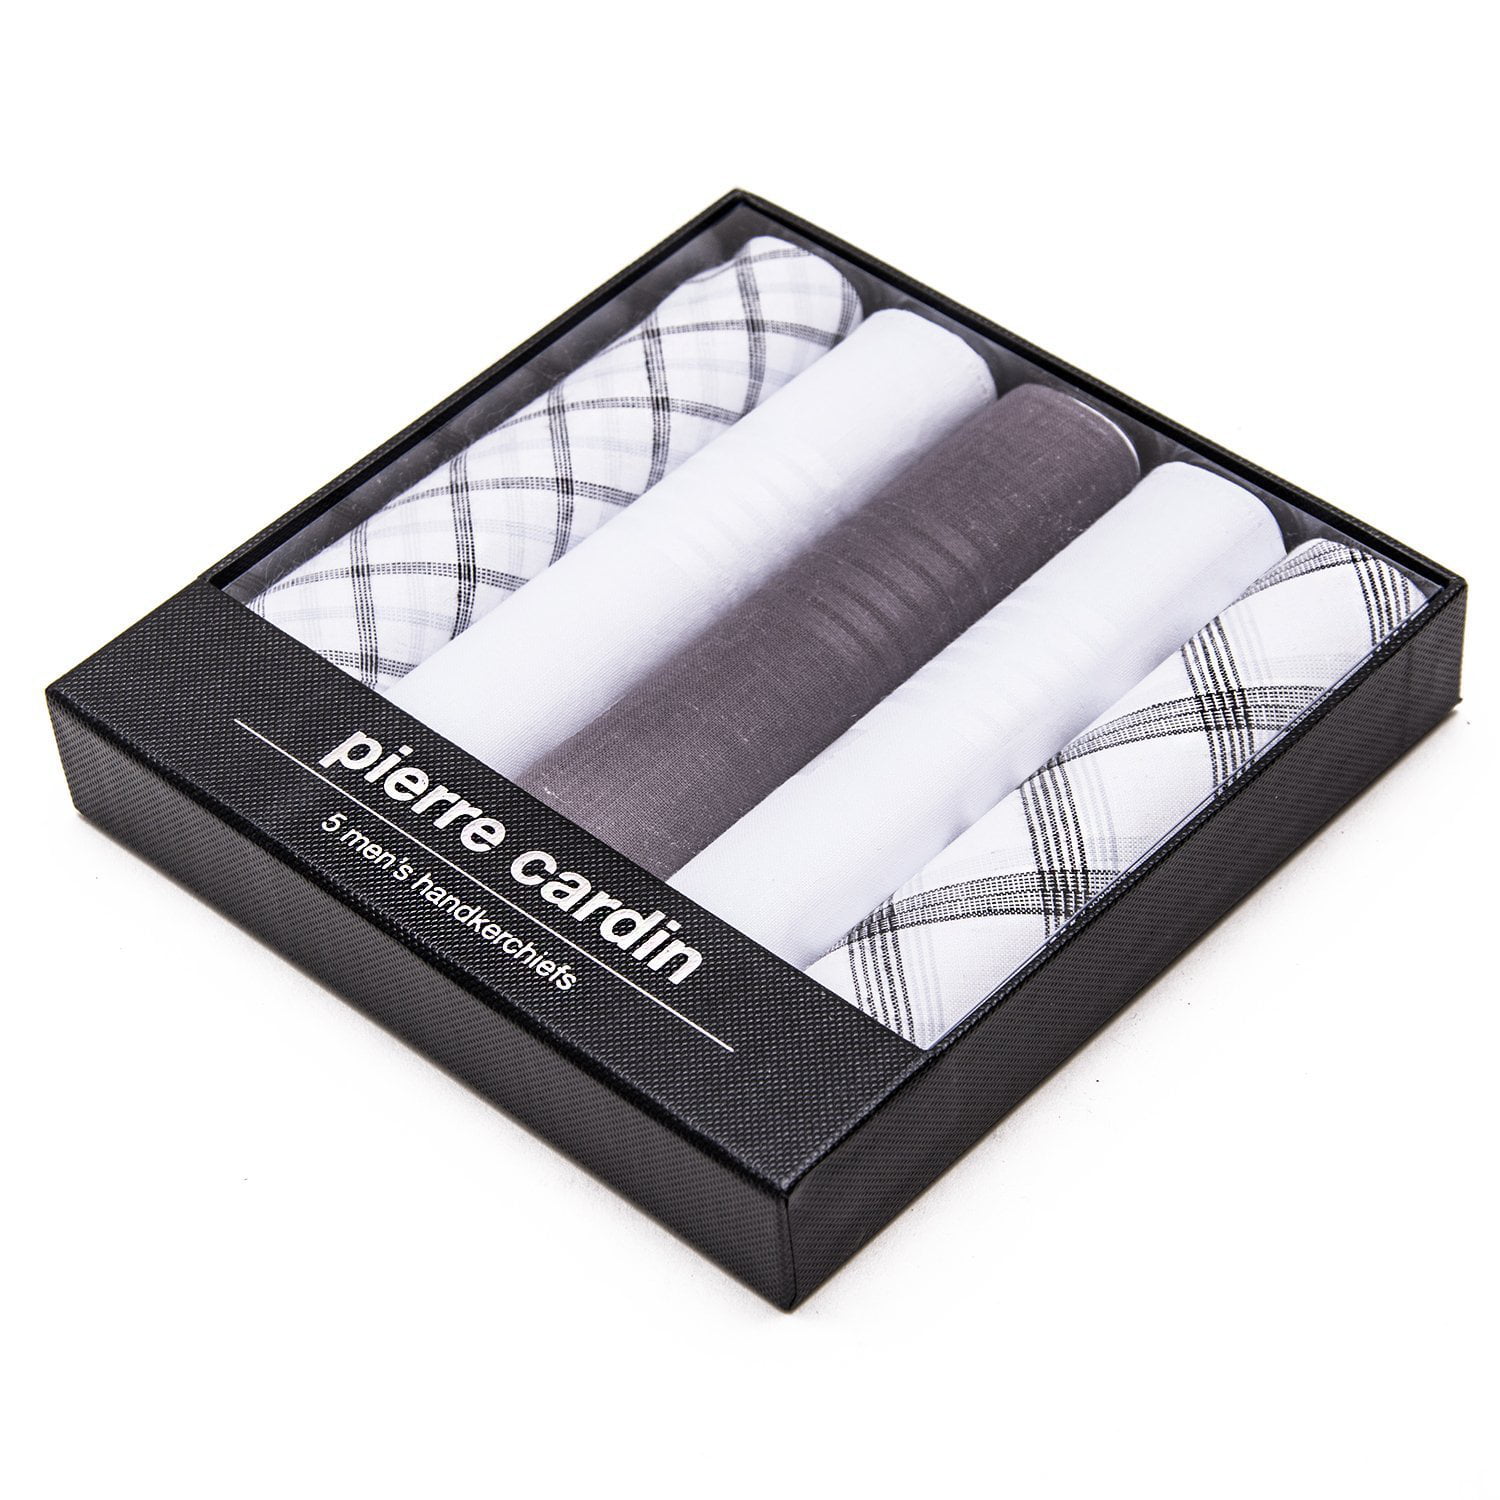 100% Pure Cotton Pierre Cardin Designer Fashion Handkerchiefs for Men-5 Pack Gift Sets in Solid Colors and Patterns 